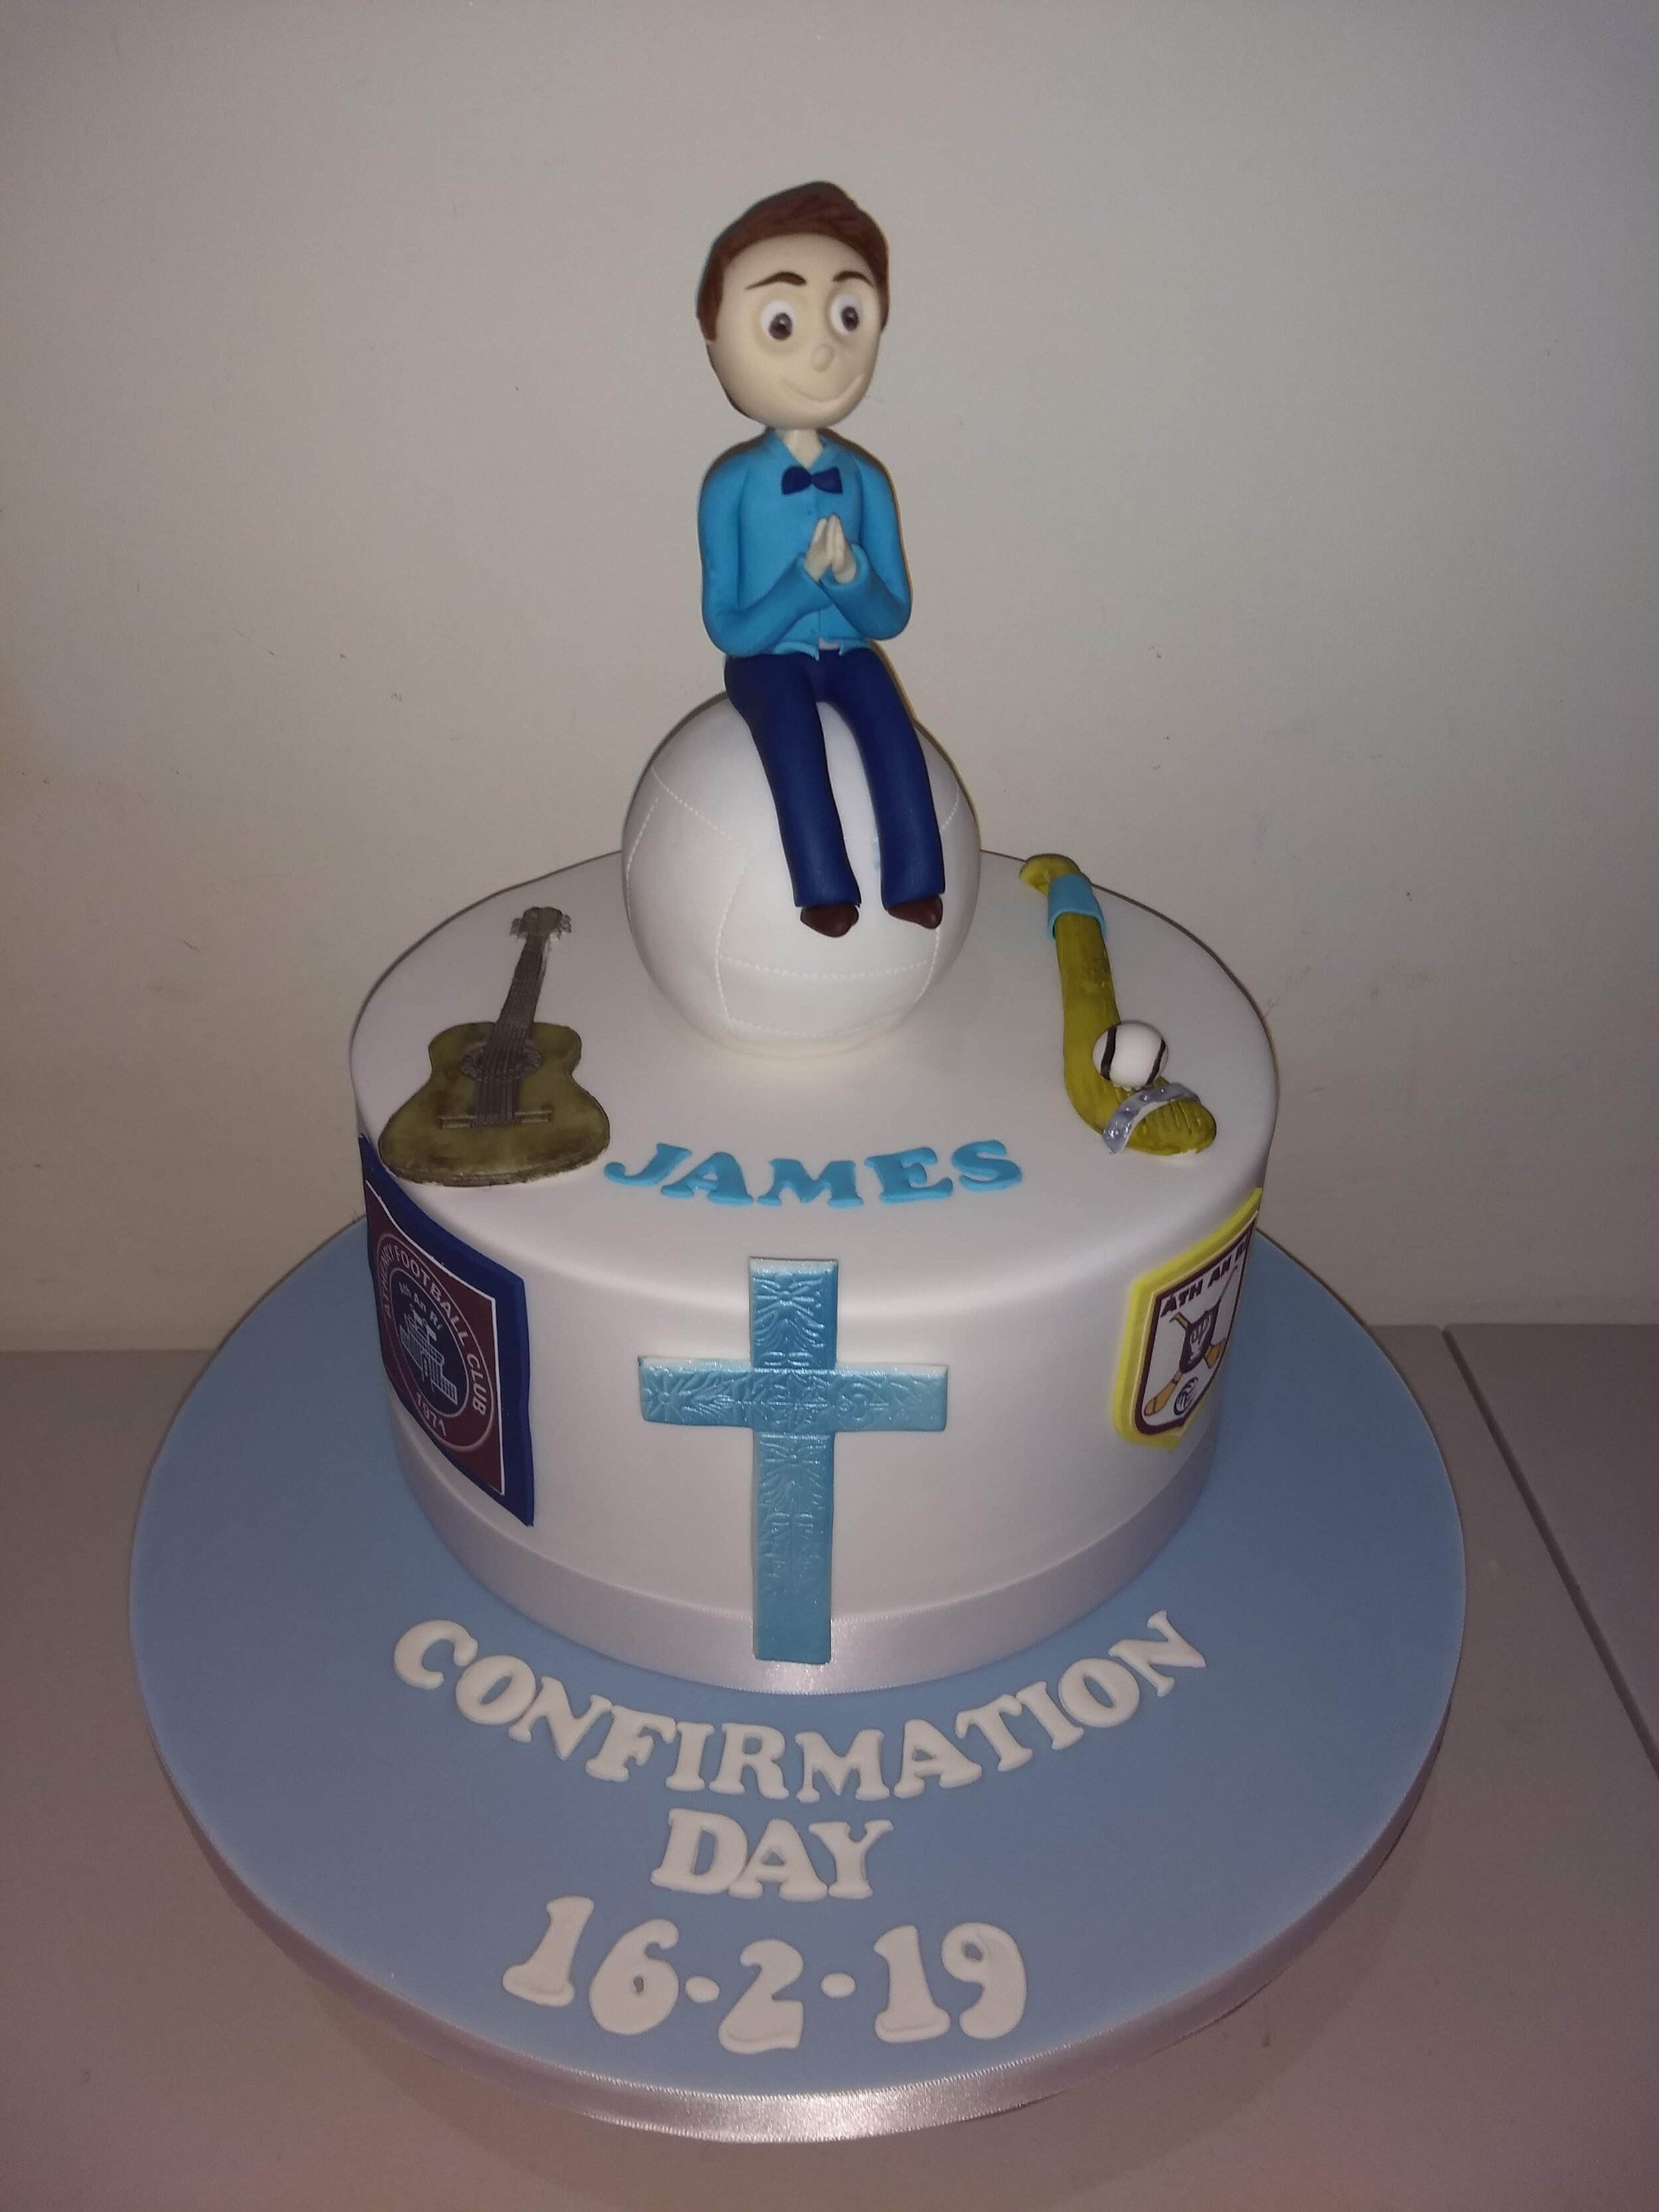 Celebrate Your Child's Communion with Delicious Communion Cakes